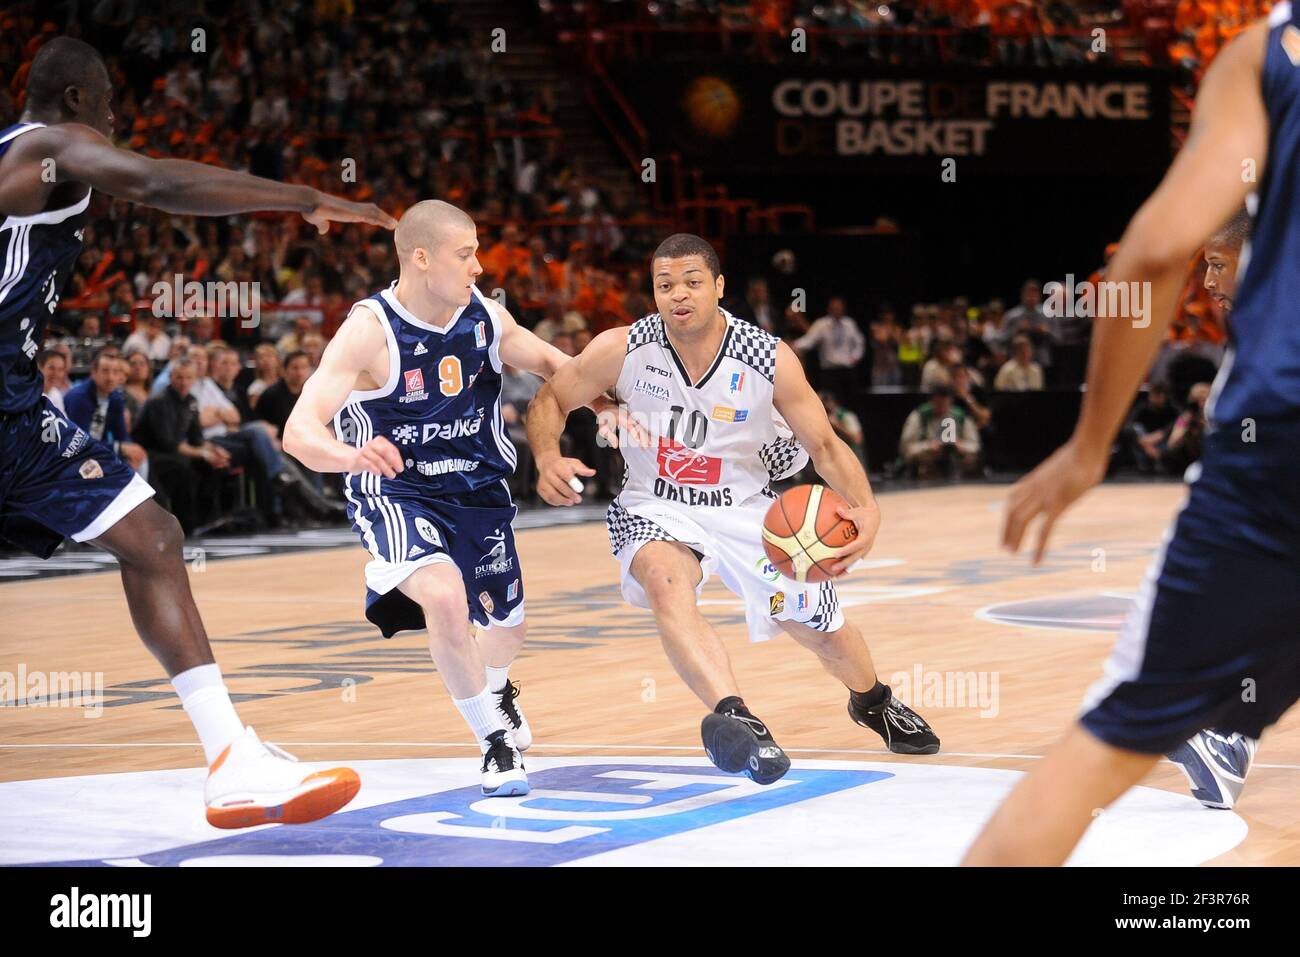 BASKETBALL - FRENCH CUP 2010 - PARIS BERCY (FRA) - 16/05/2010 - PHOTO :  PASCAL ALLEE / HOT SPORTS / DPPI - FINAL MEN - ORLEANS v  GRAVELINES-DUNKERQUE - ALDO CURTI (ORLEANS) / BEN WOODSIDE (GRAVELINES  Stock Photo - Alamy